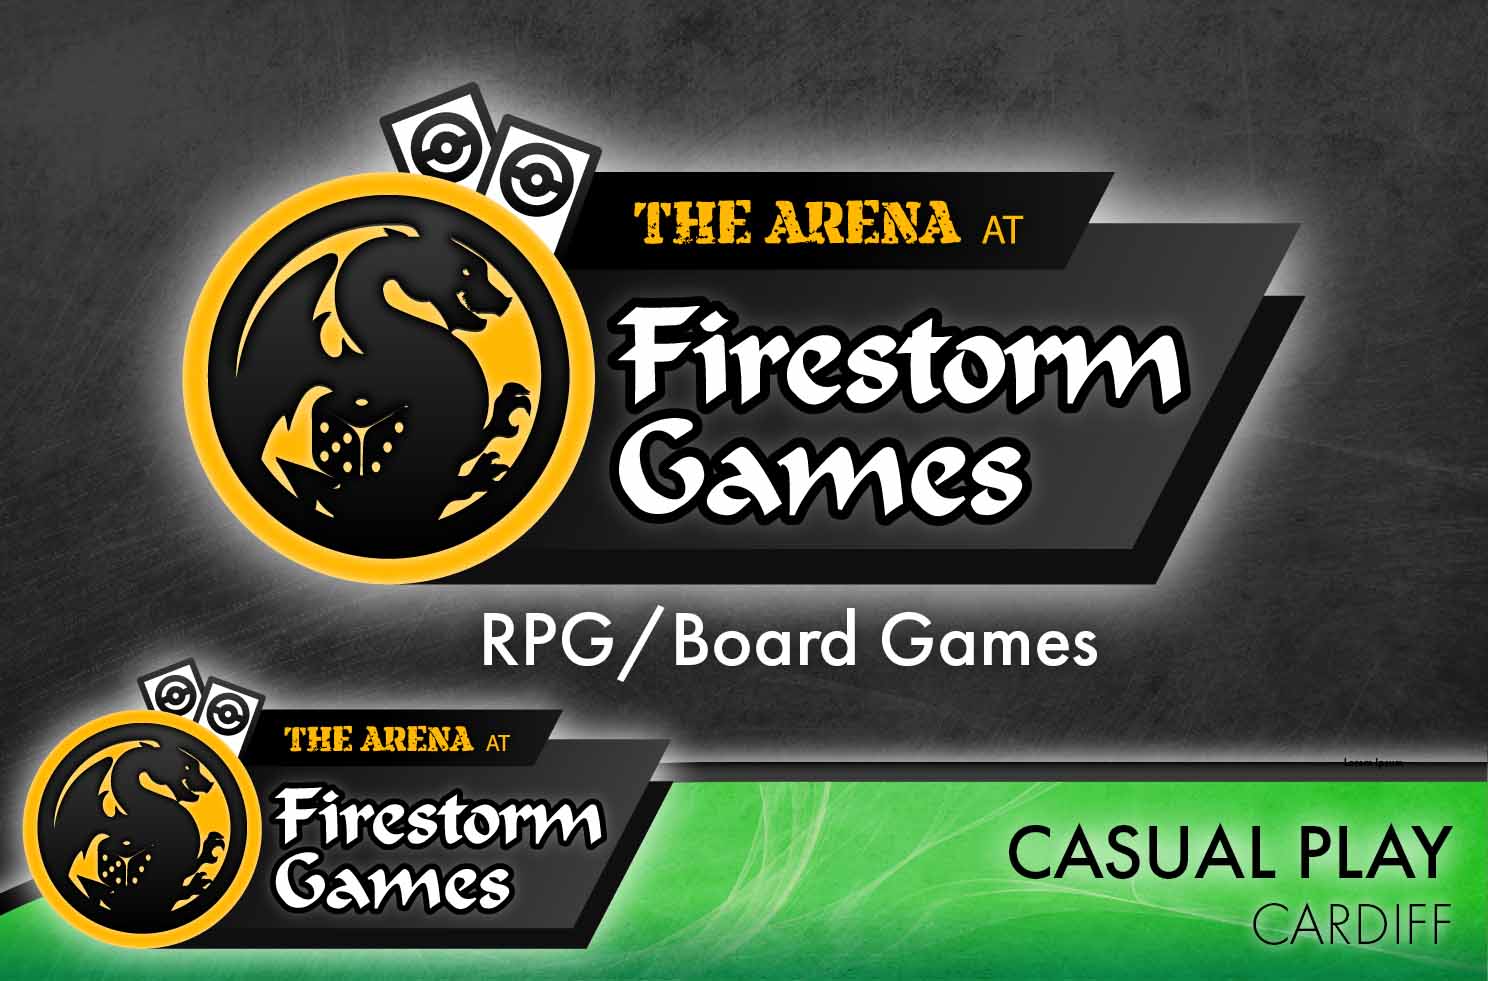 The Arena Sunday RPG/Board Game Ticket